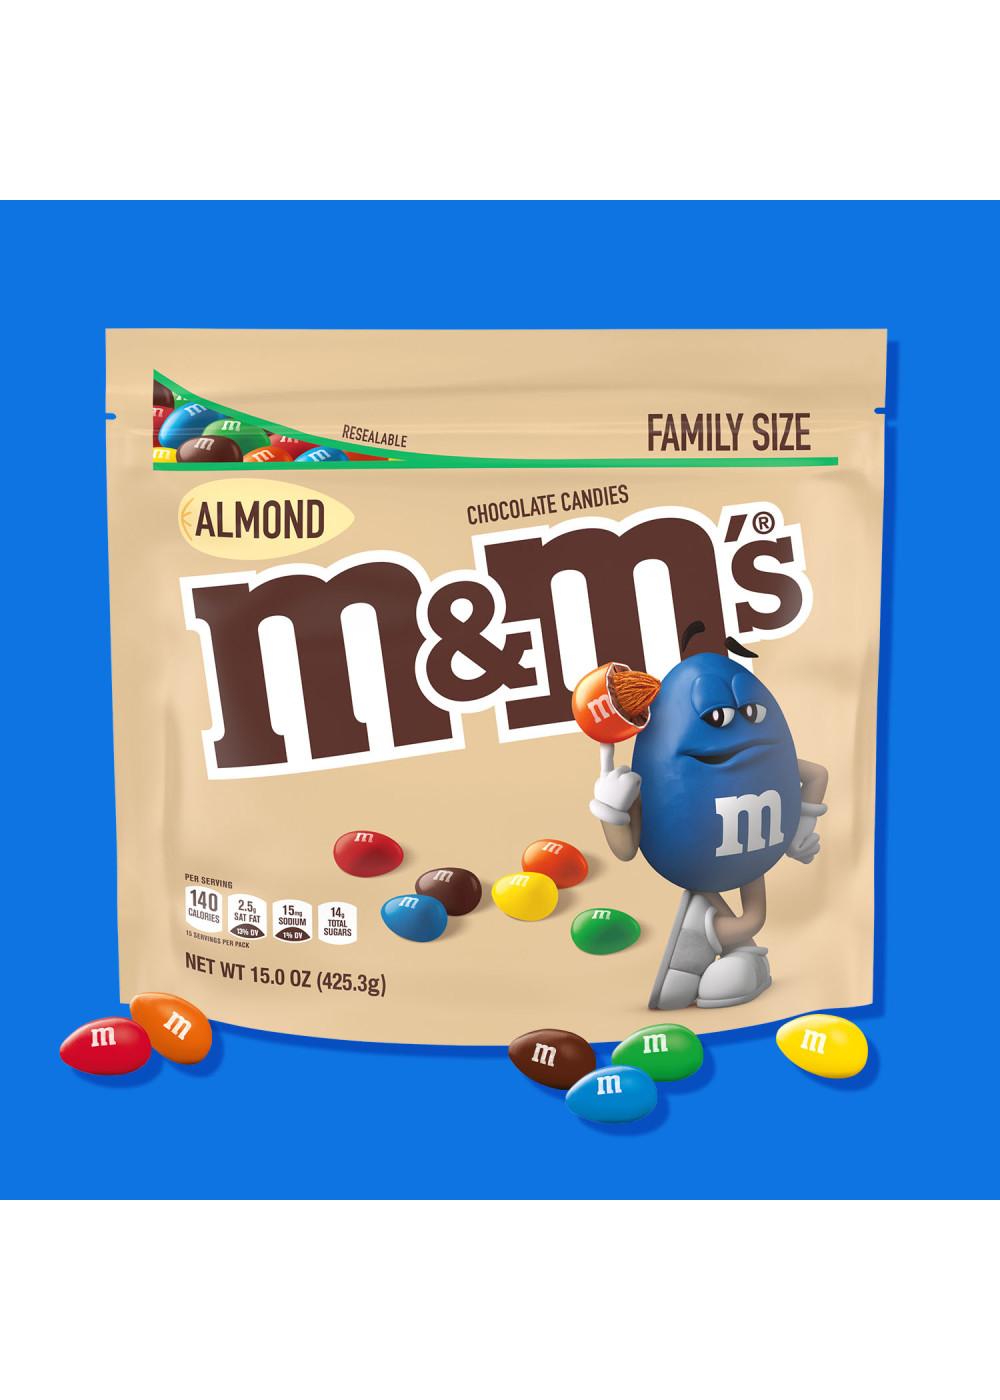 M&M'S Almond Chocolate Candy - Family Size; image 3 of 10